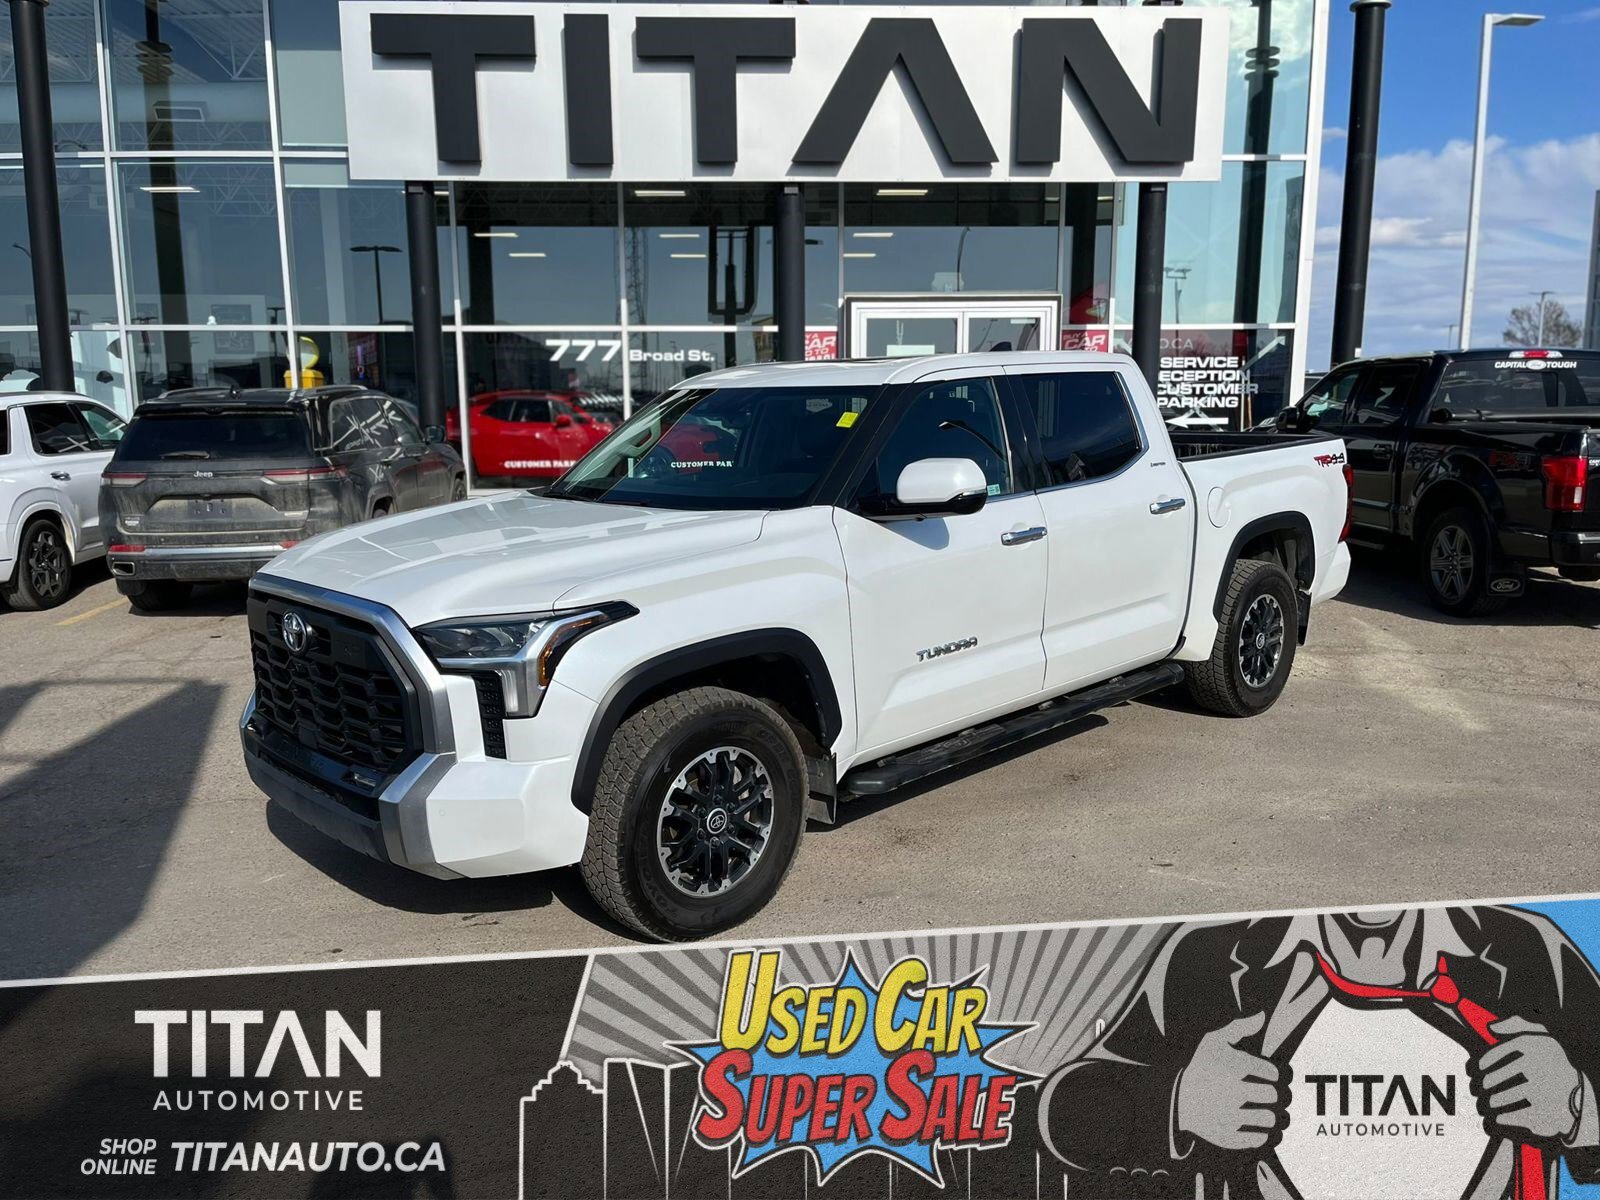 2022 Toyota Tundra 4x4 Crewmax Limited | 15in Display | 360 Cam | Pan